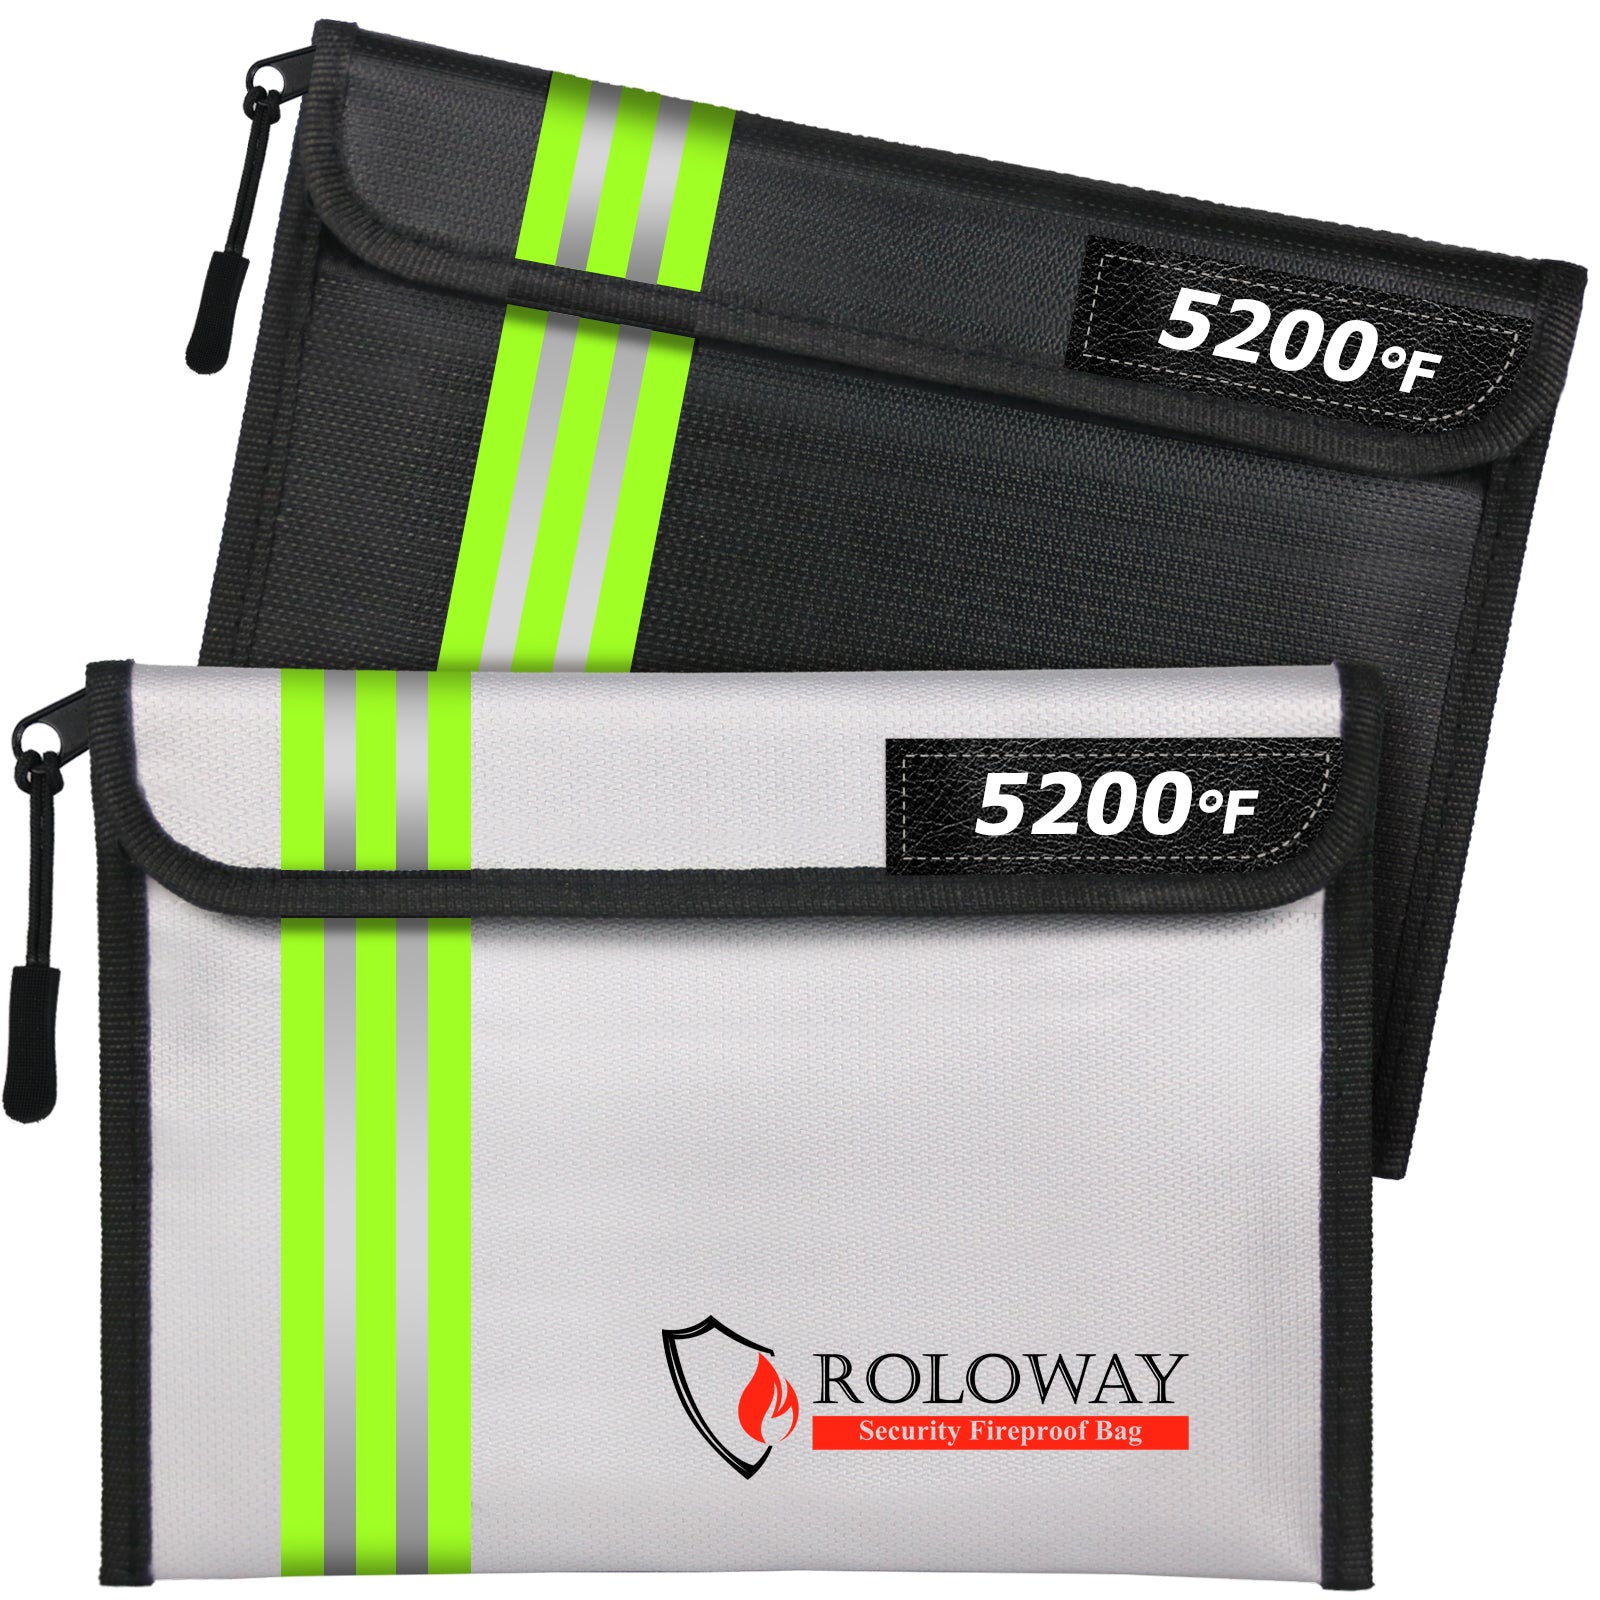 ROLOWAY Fireproof Bag (9.6 x 6.6 inch) with 5200°F Upgraded Aluminum Foil Layer(2-Pack)